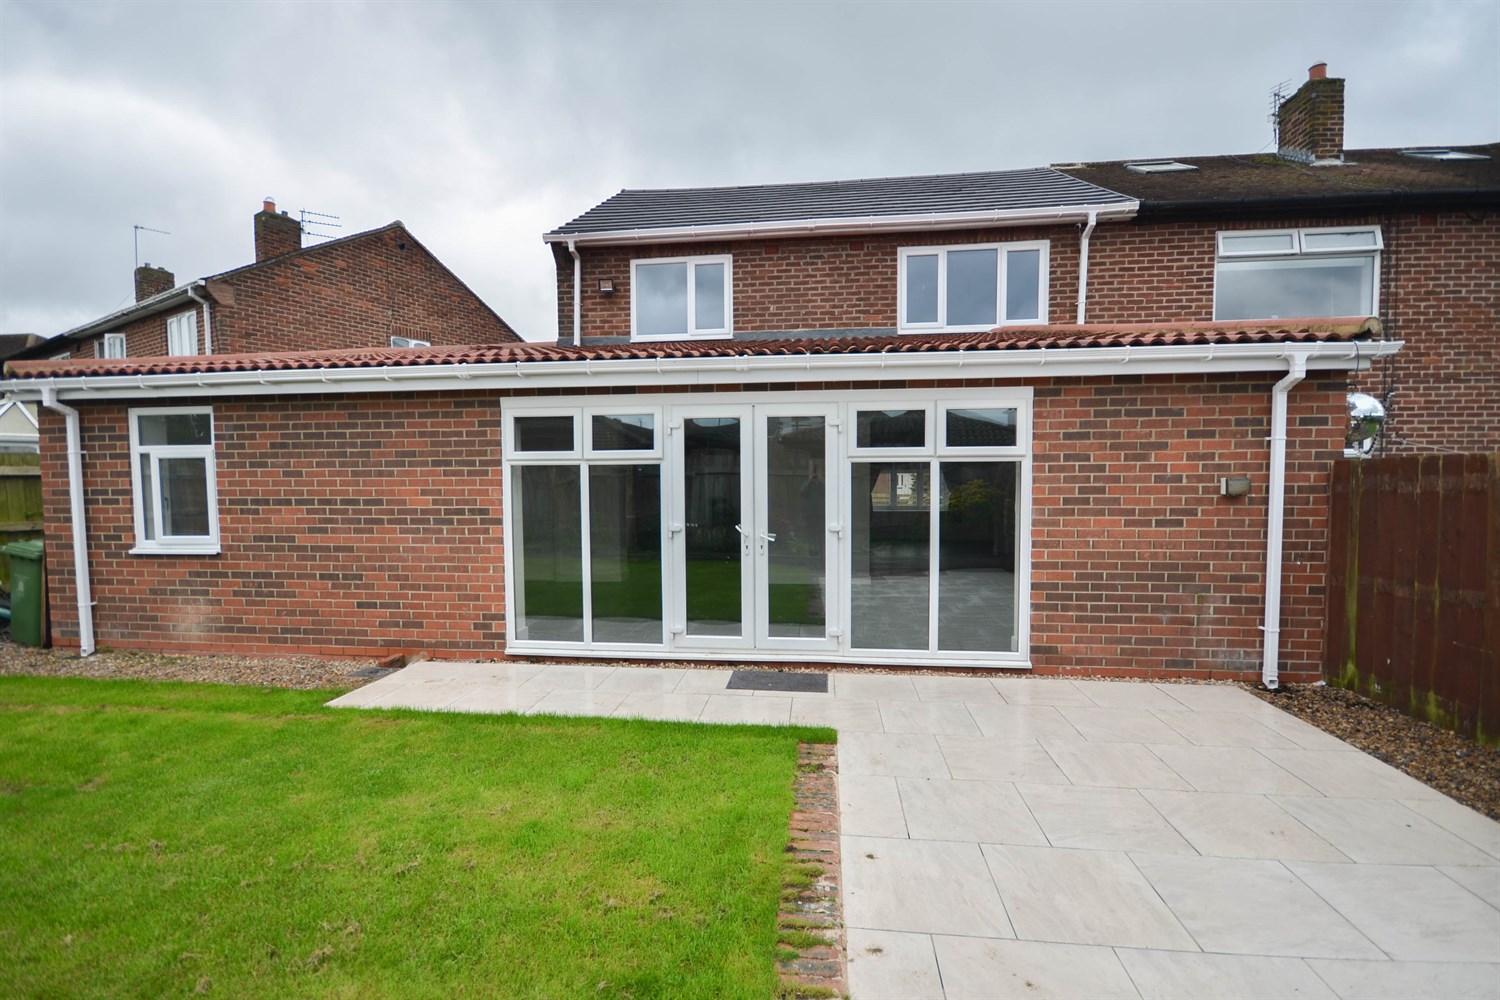 4 bed semi-detached house for sale in Biddick Hall Drive, South Shields - Property Image 1